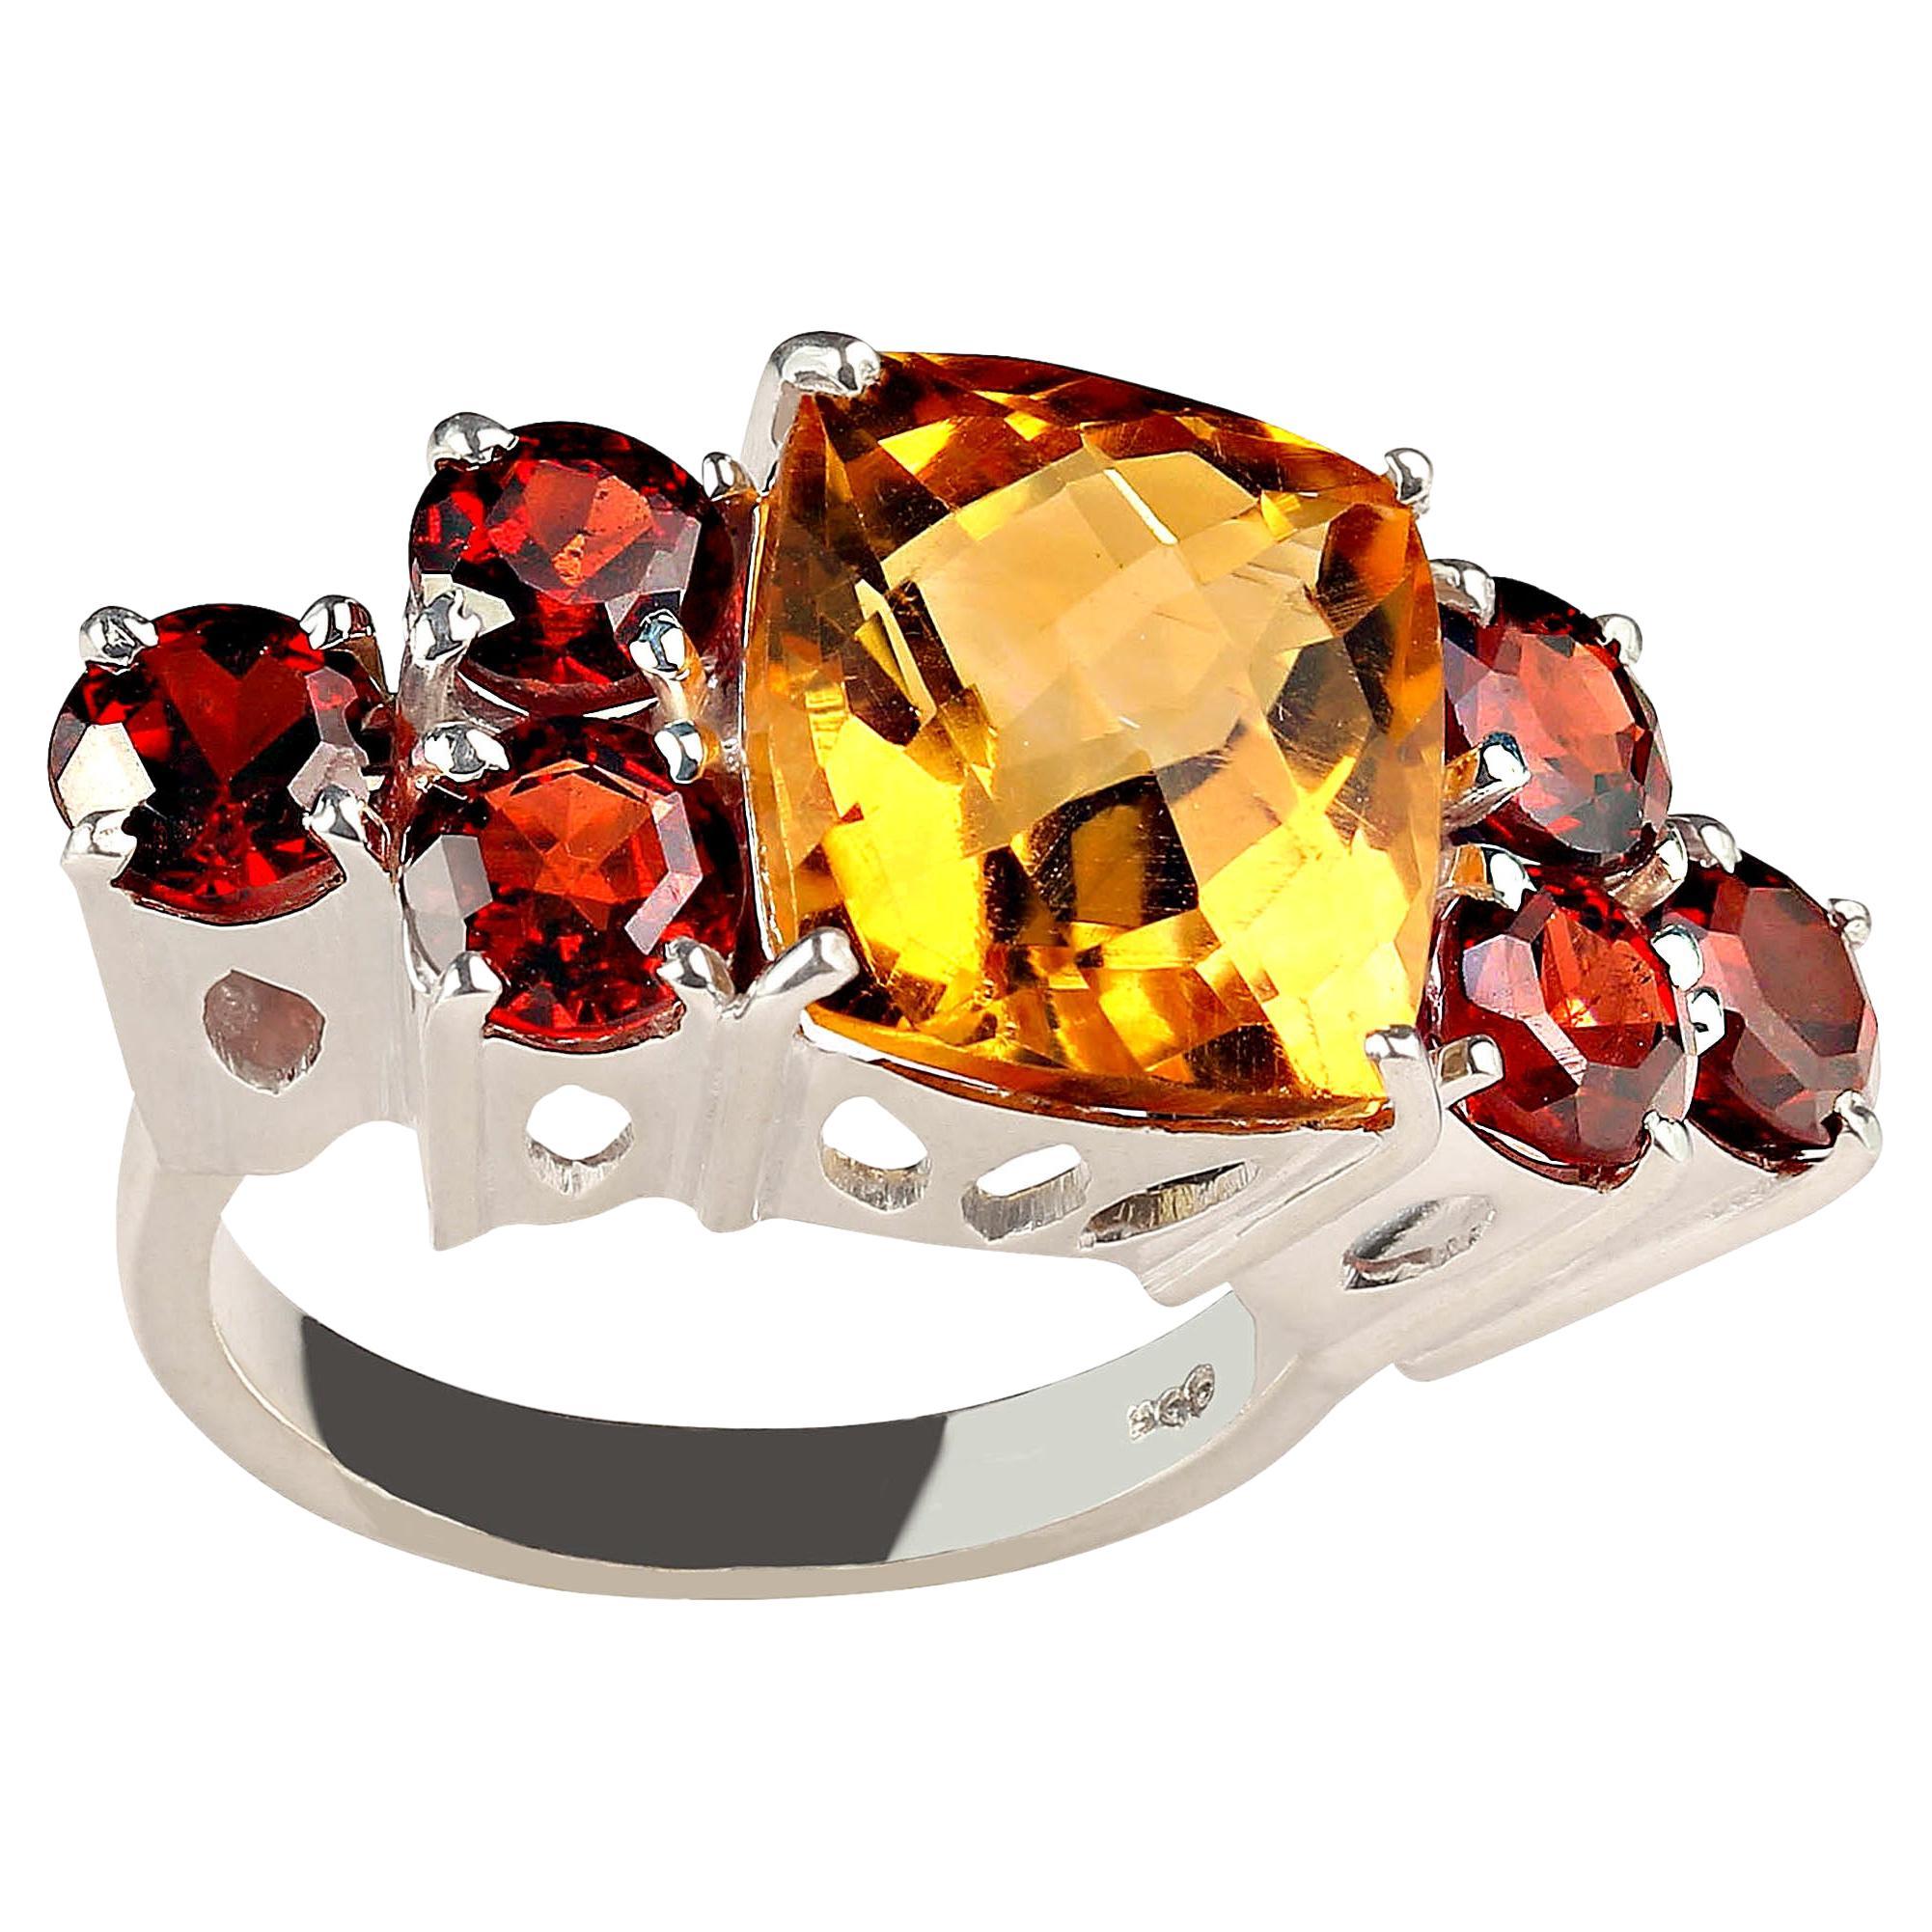 This is just the ring for cocktails and dinner.  Knuckle to knuckle pop and sparkle. Gorgeous sparkling golden antique cushion shaped Citrine with a checkerboard table is flanked with glittering red garnets, three and each side. The Citrine weighs